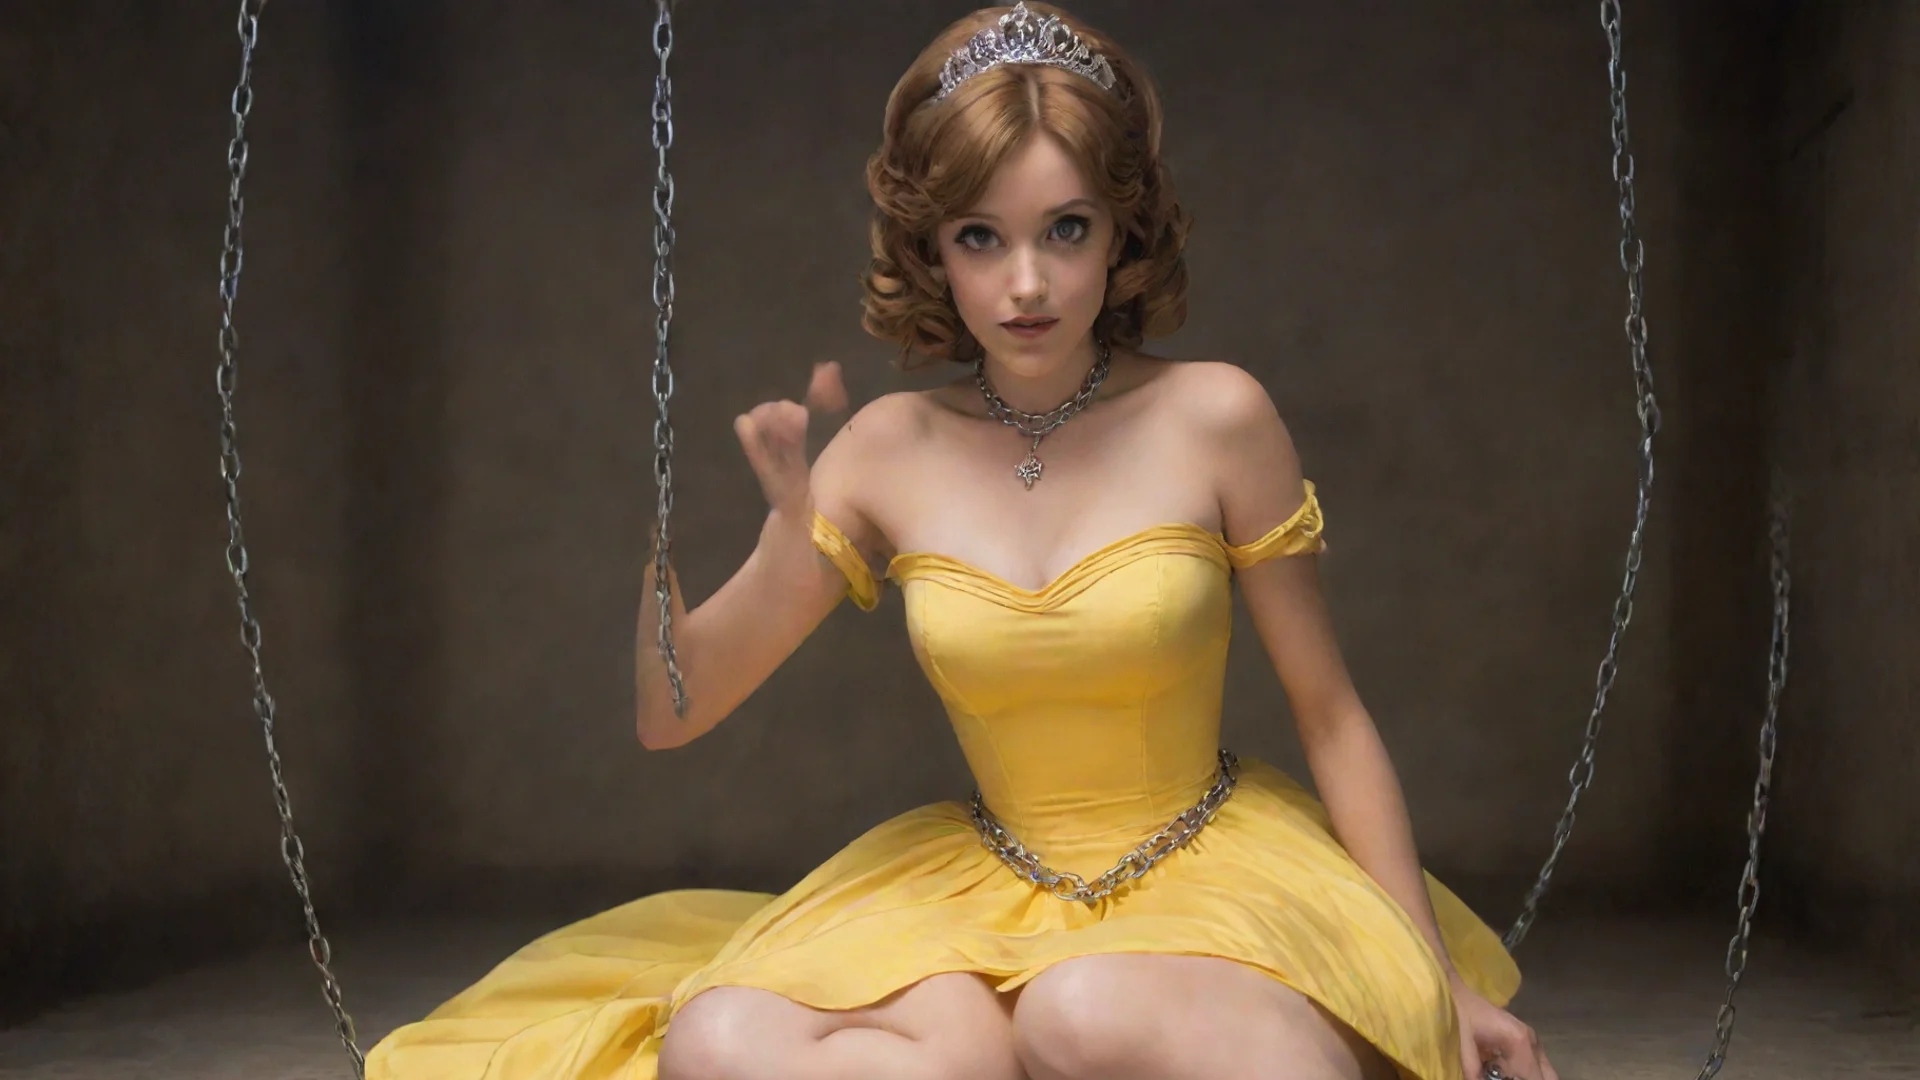 trending princess daisy restrained by chains in her yellow dress good looking fantastic 1 wide